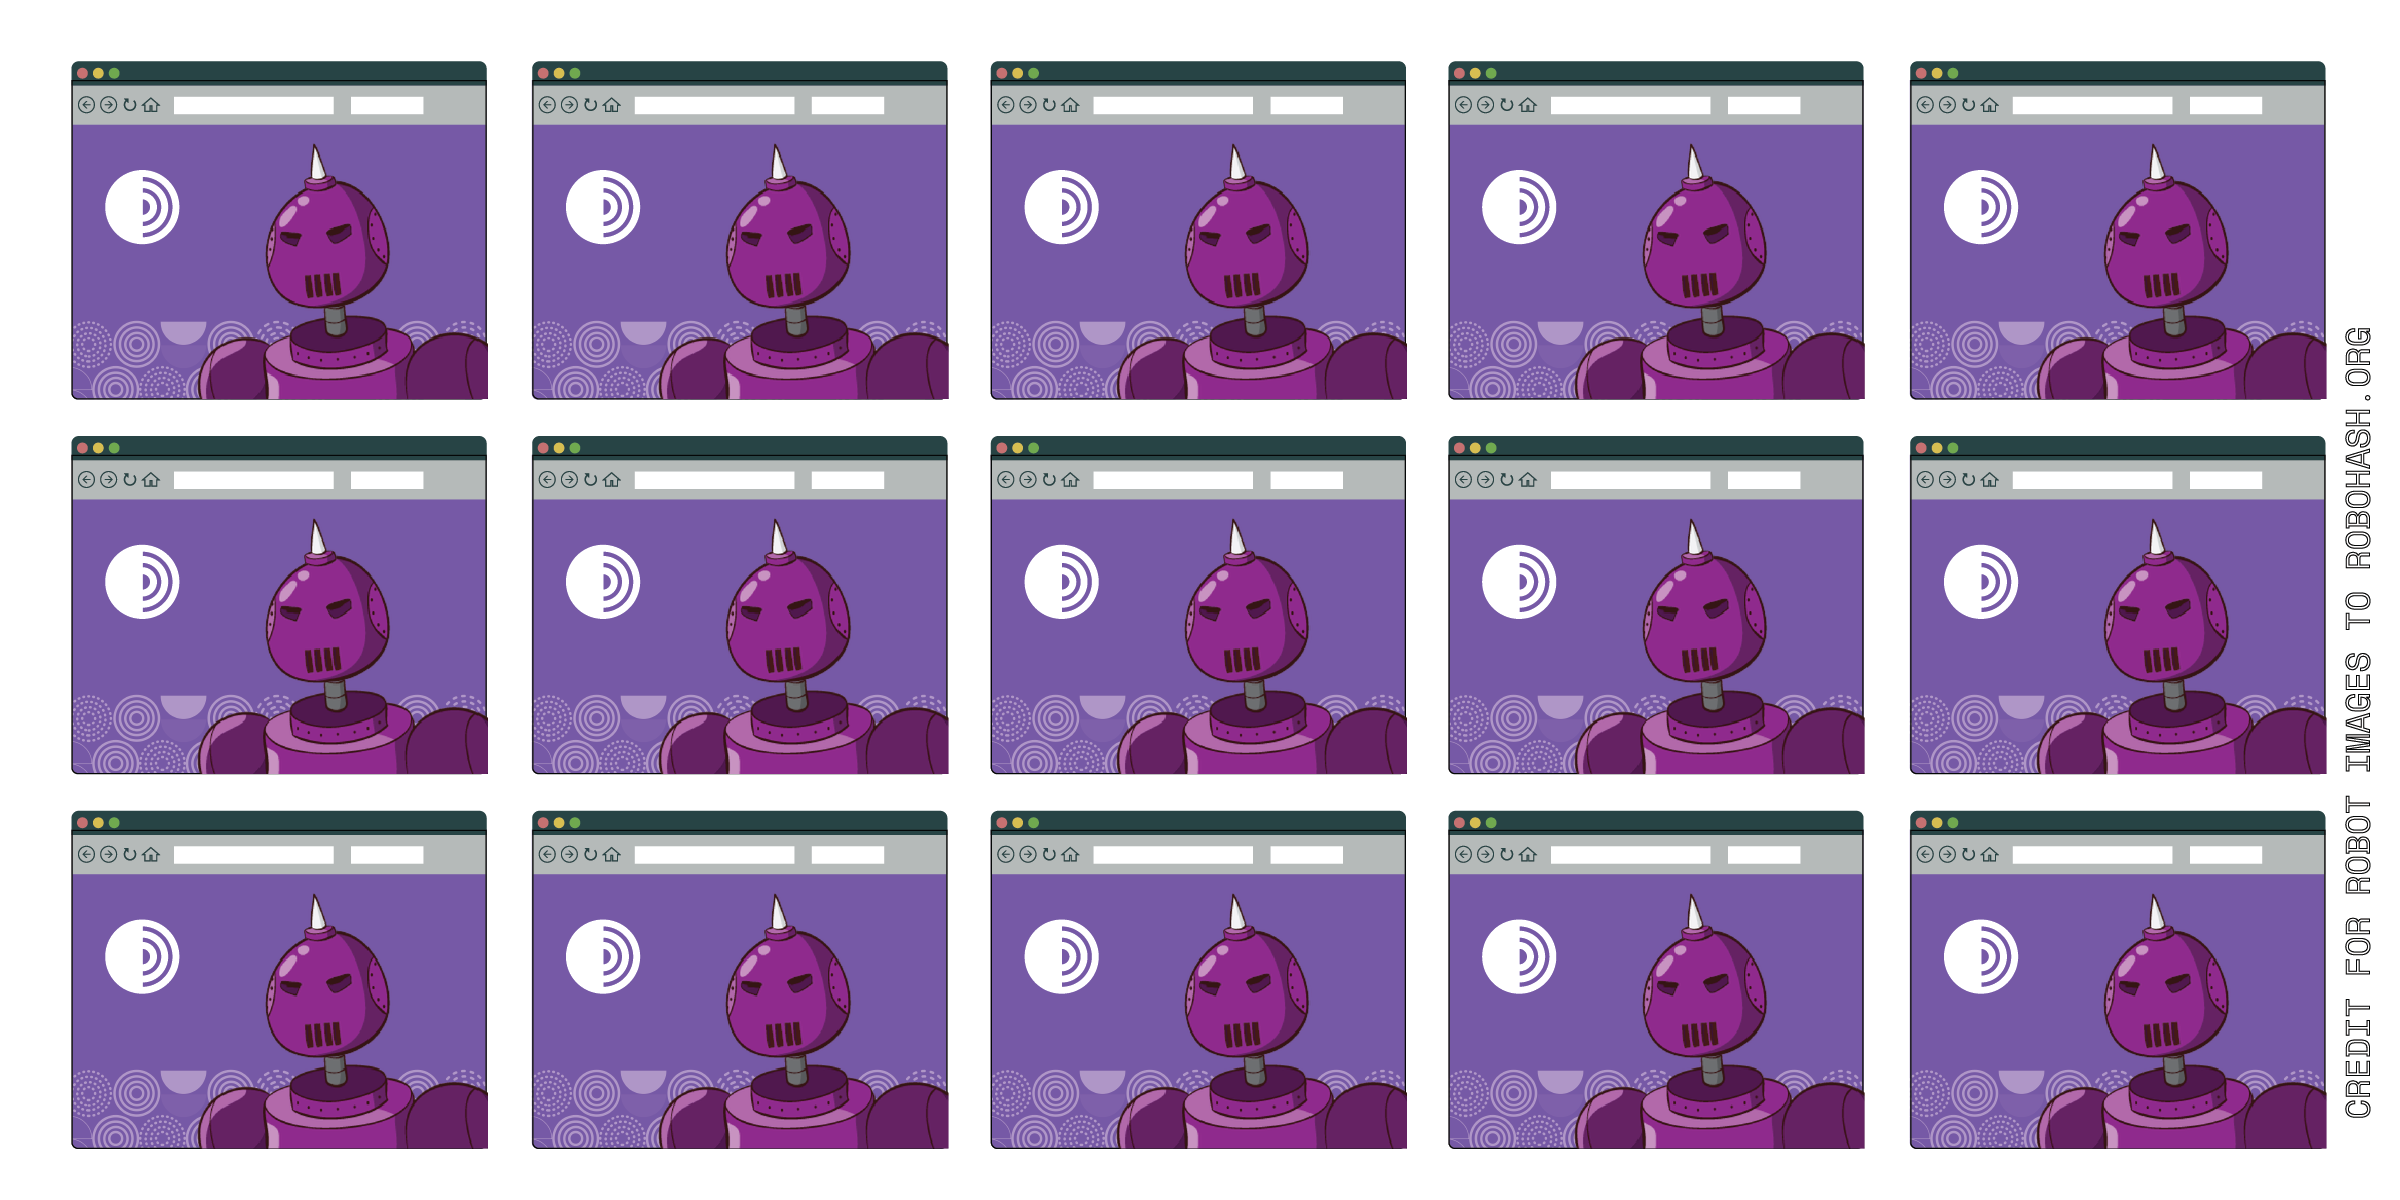 A three by five grid of Tor Browsers with purple robots that all look the same.